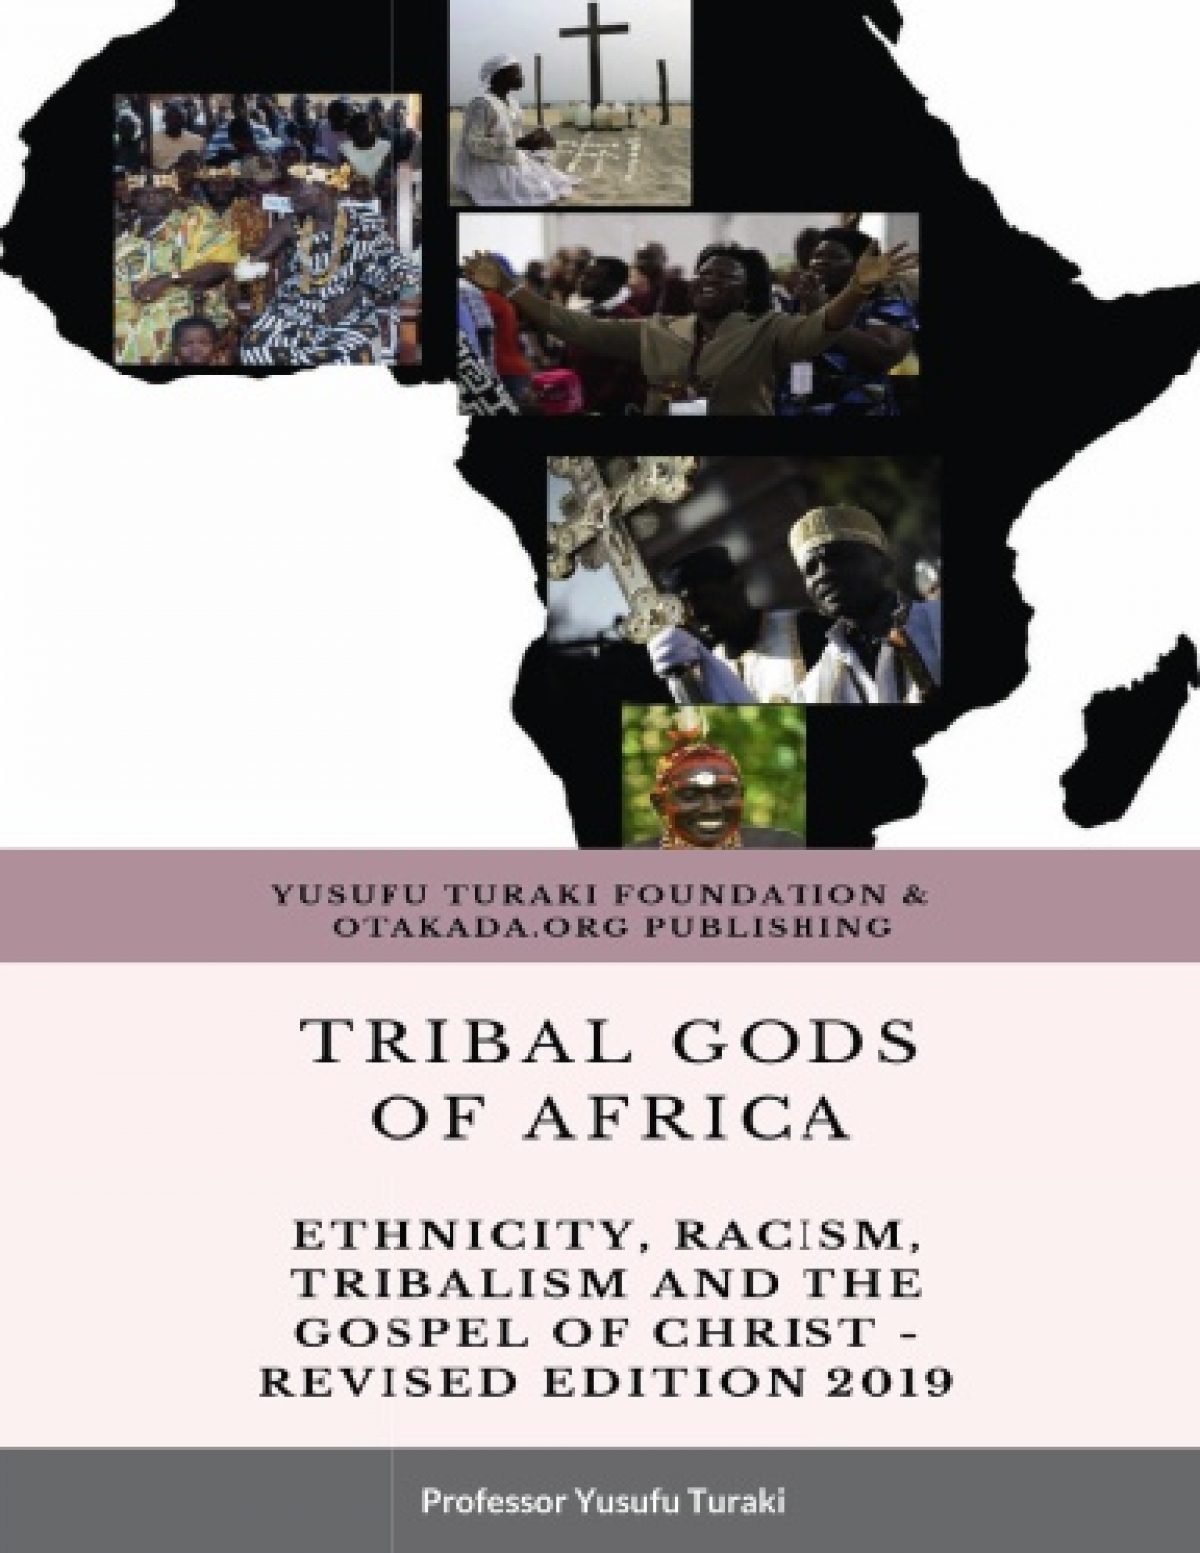 TRIBAL GODS OF AFRICA - Paperback - ETHNICITY RACISM TRIBALISM AND THE GOSPEL OF CHRIST Revised Edition 2019 by Yusufu Turaki